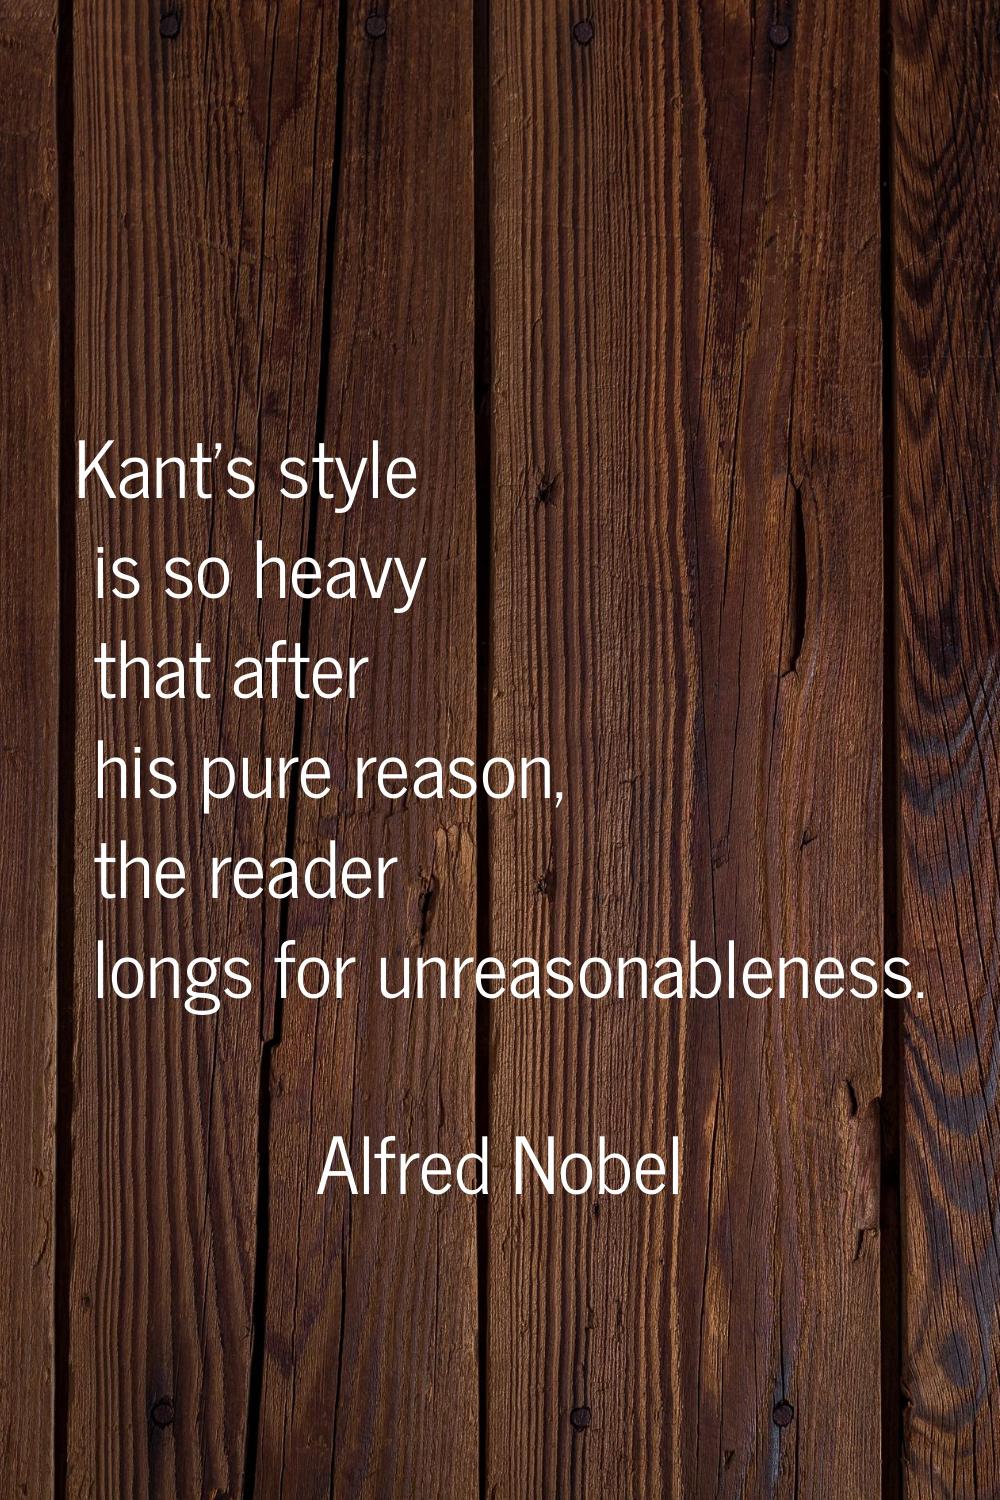 Kant's style is so heavy that after his pure reason, the reader longs for unreasonableness.